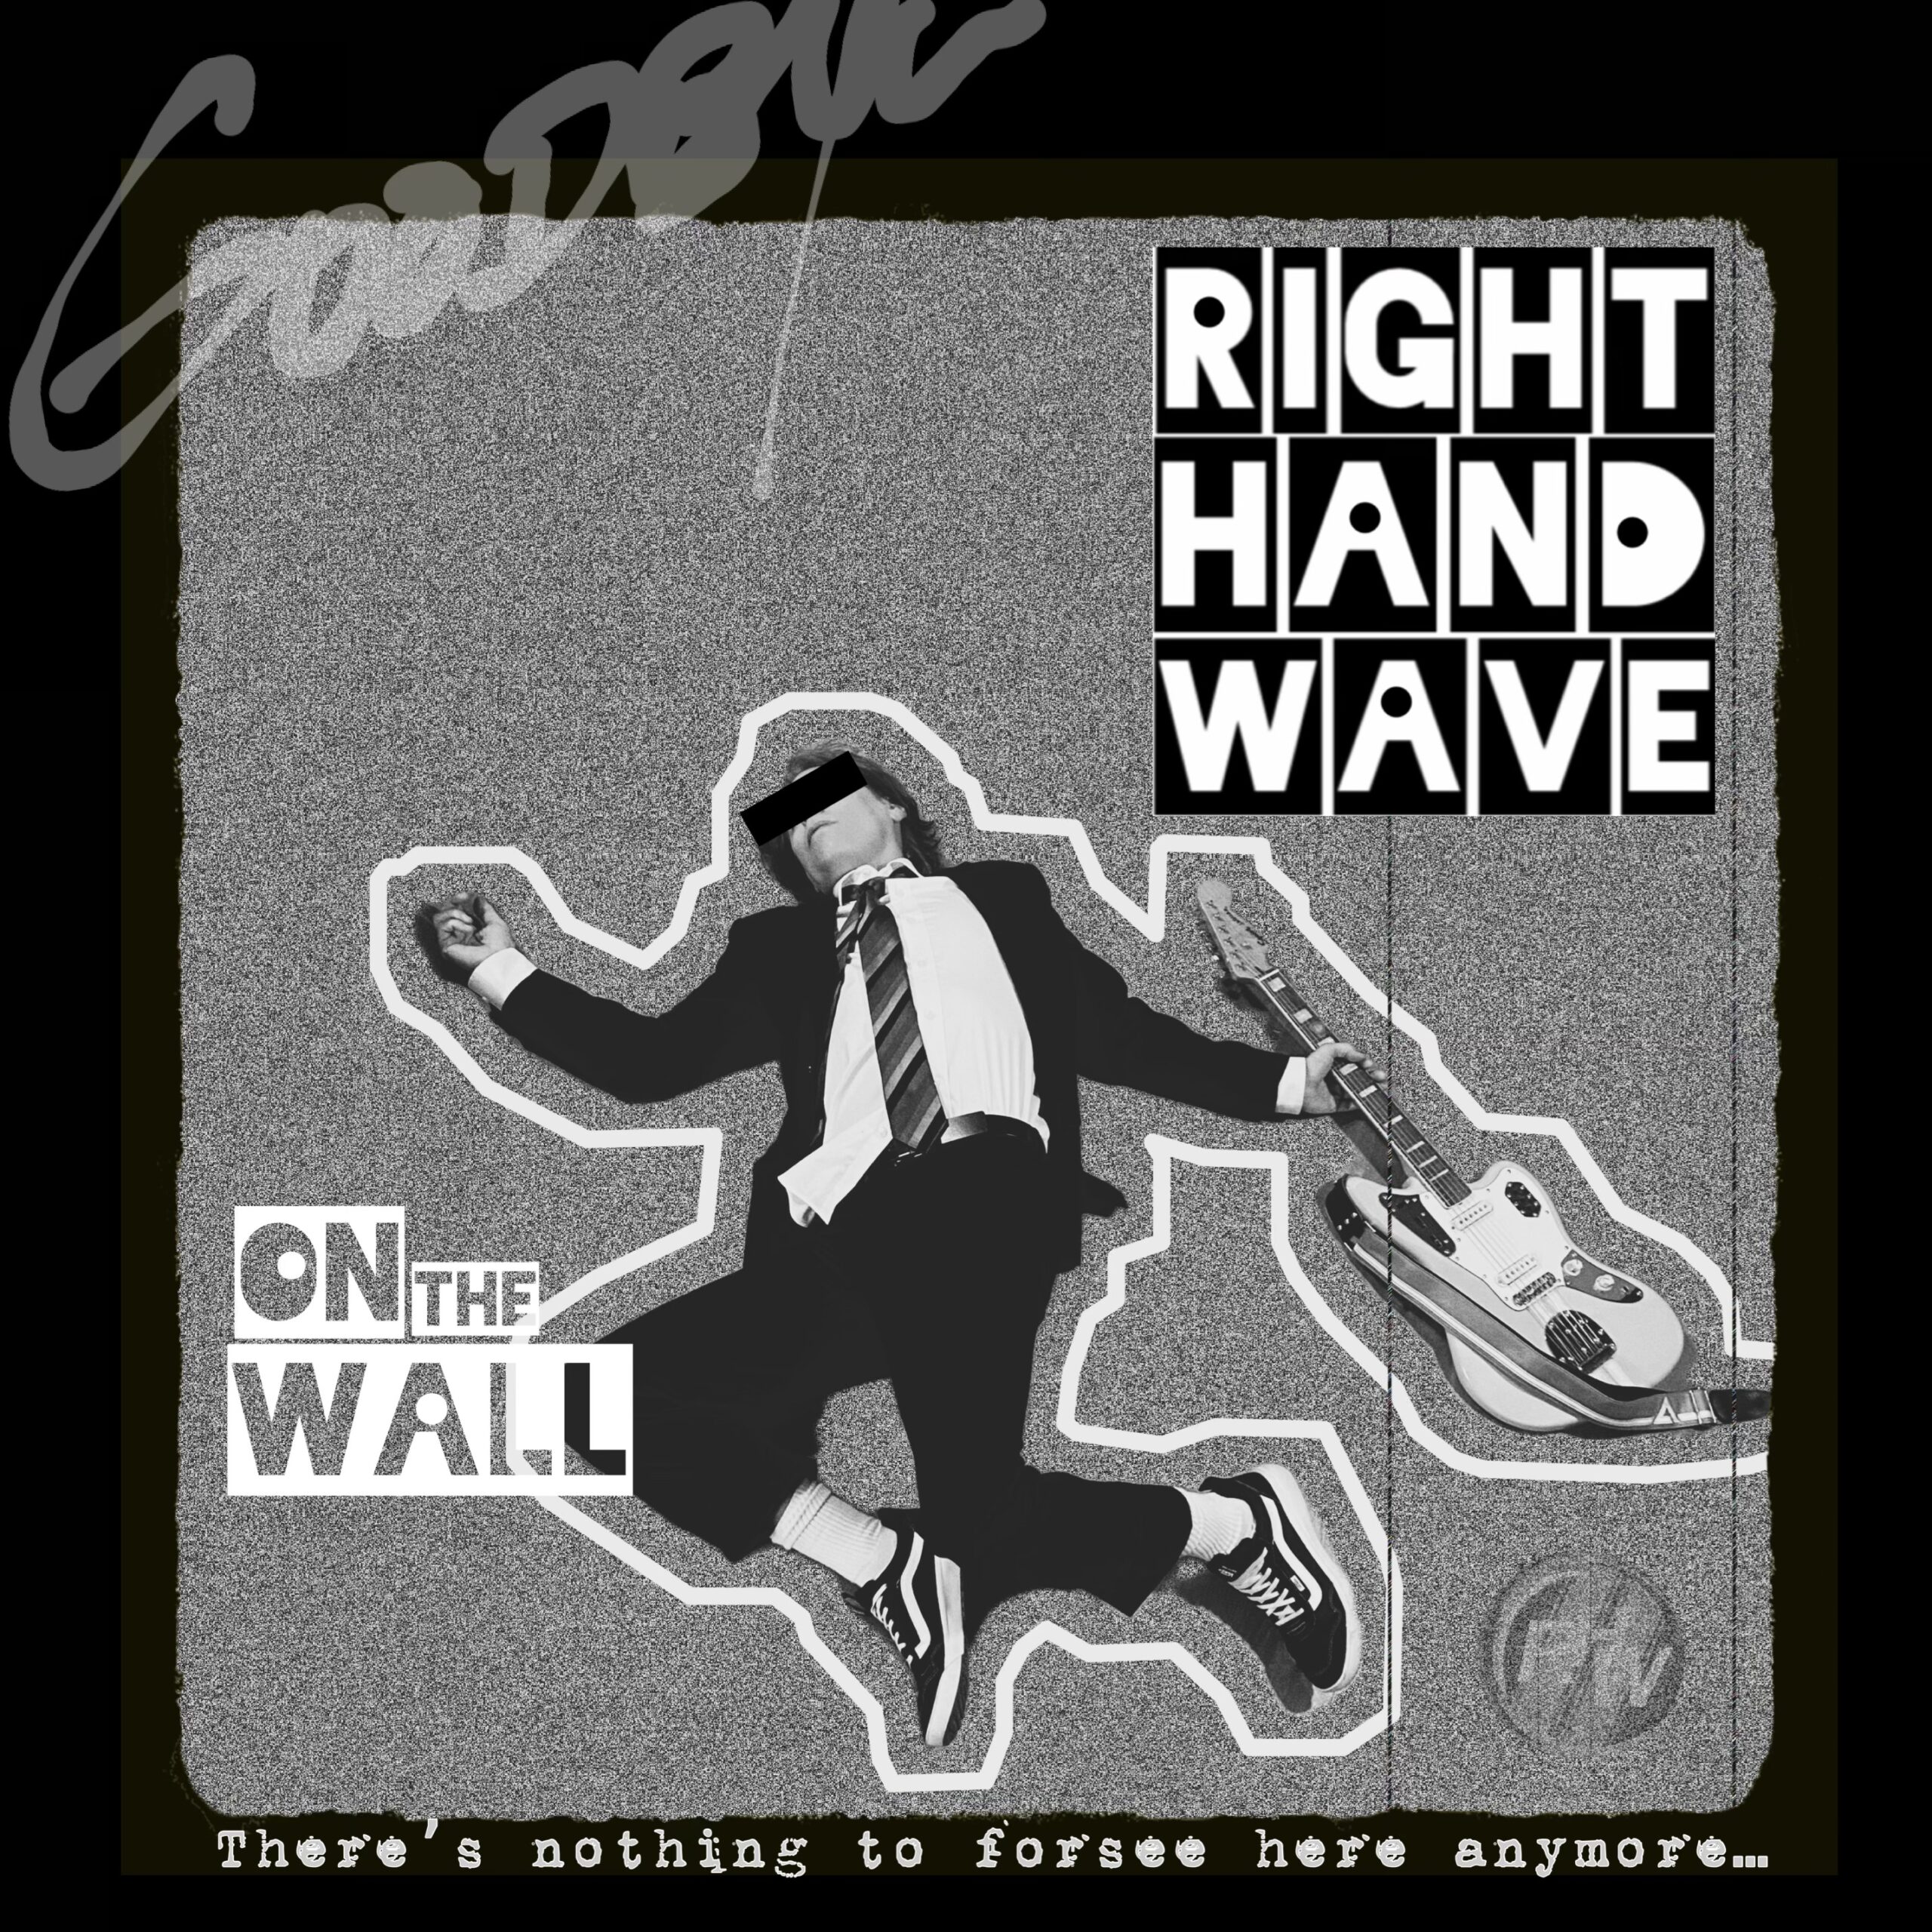 “Riding the Sonic Wave with RightHandWave: ‘On the Wall’ Takes Us Back in Time”